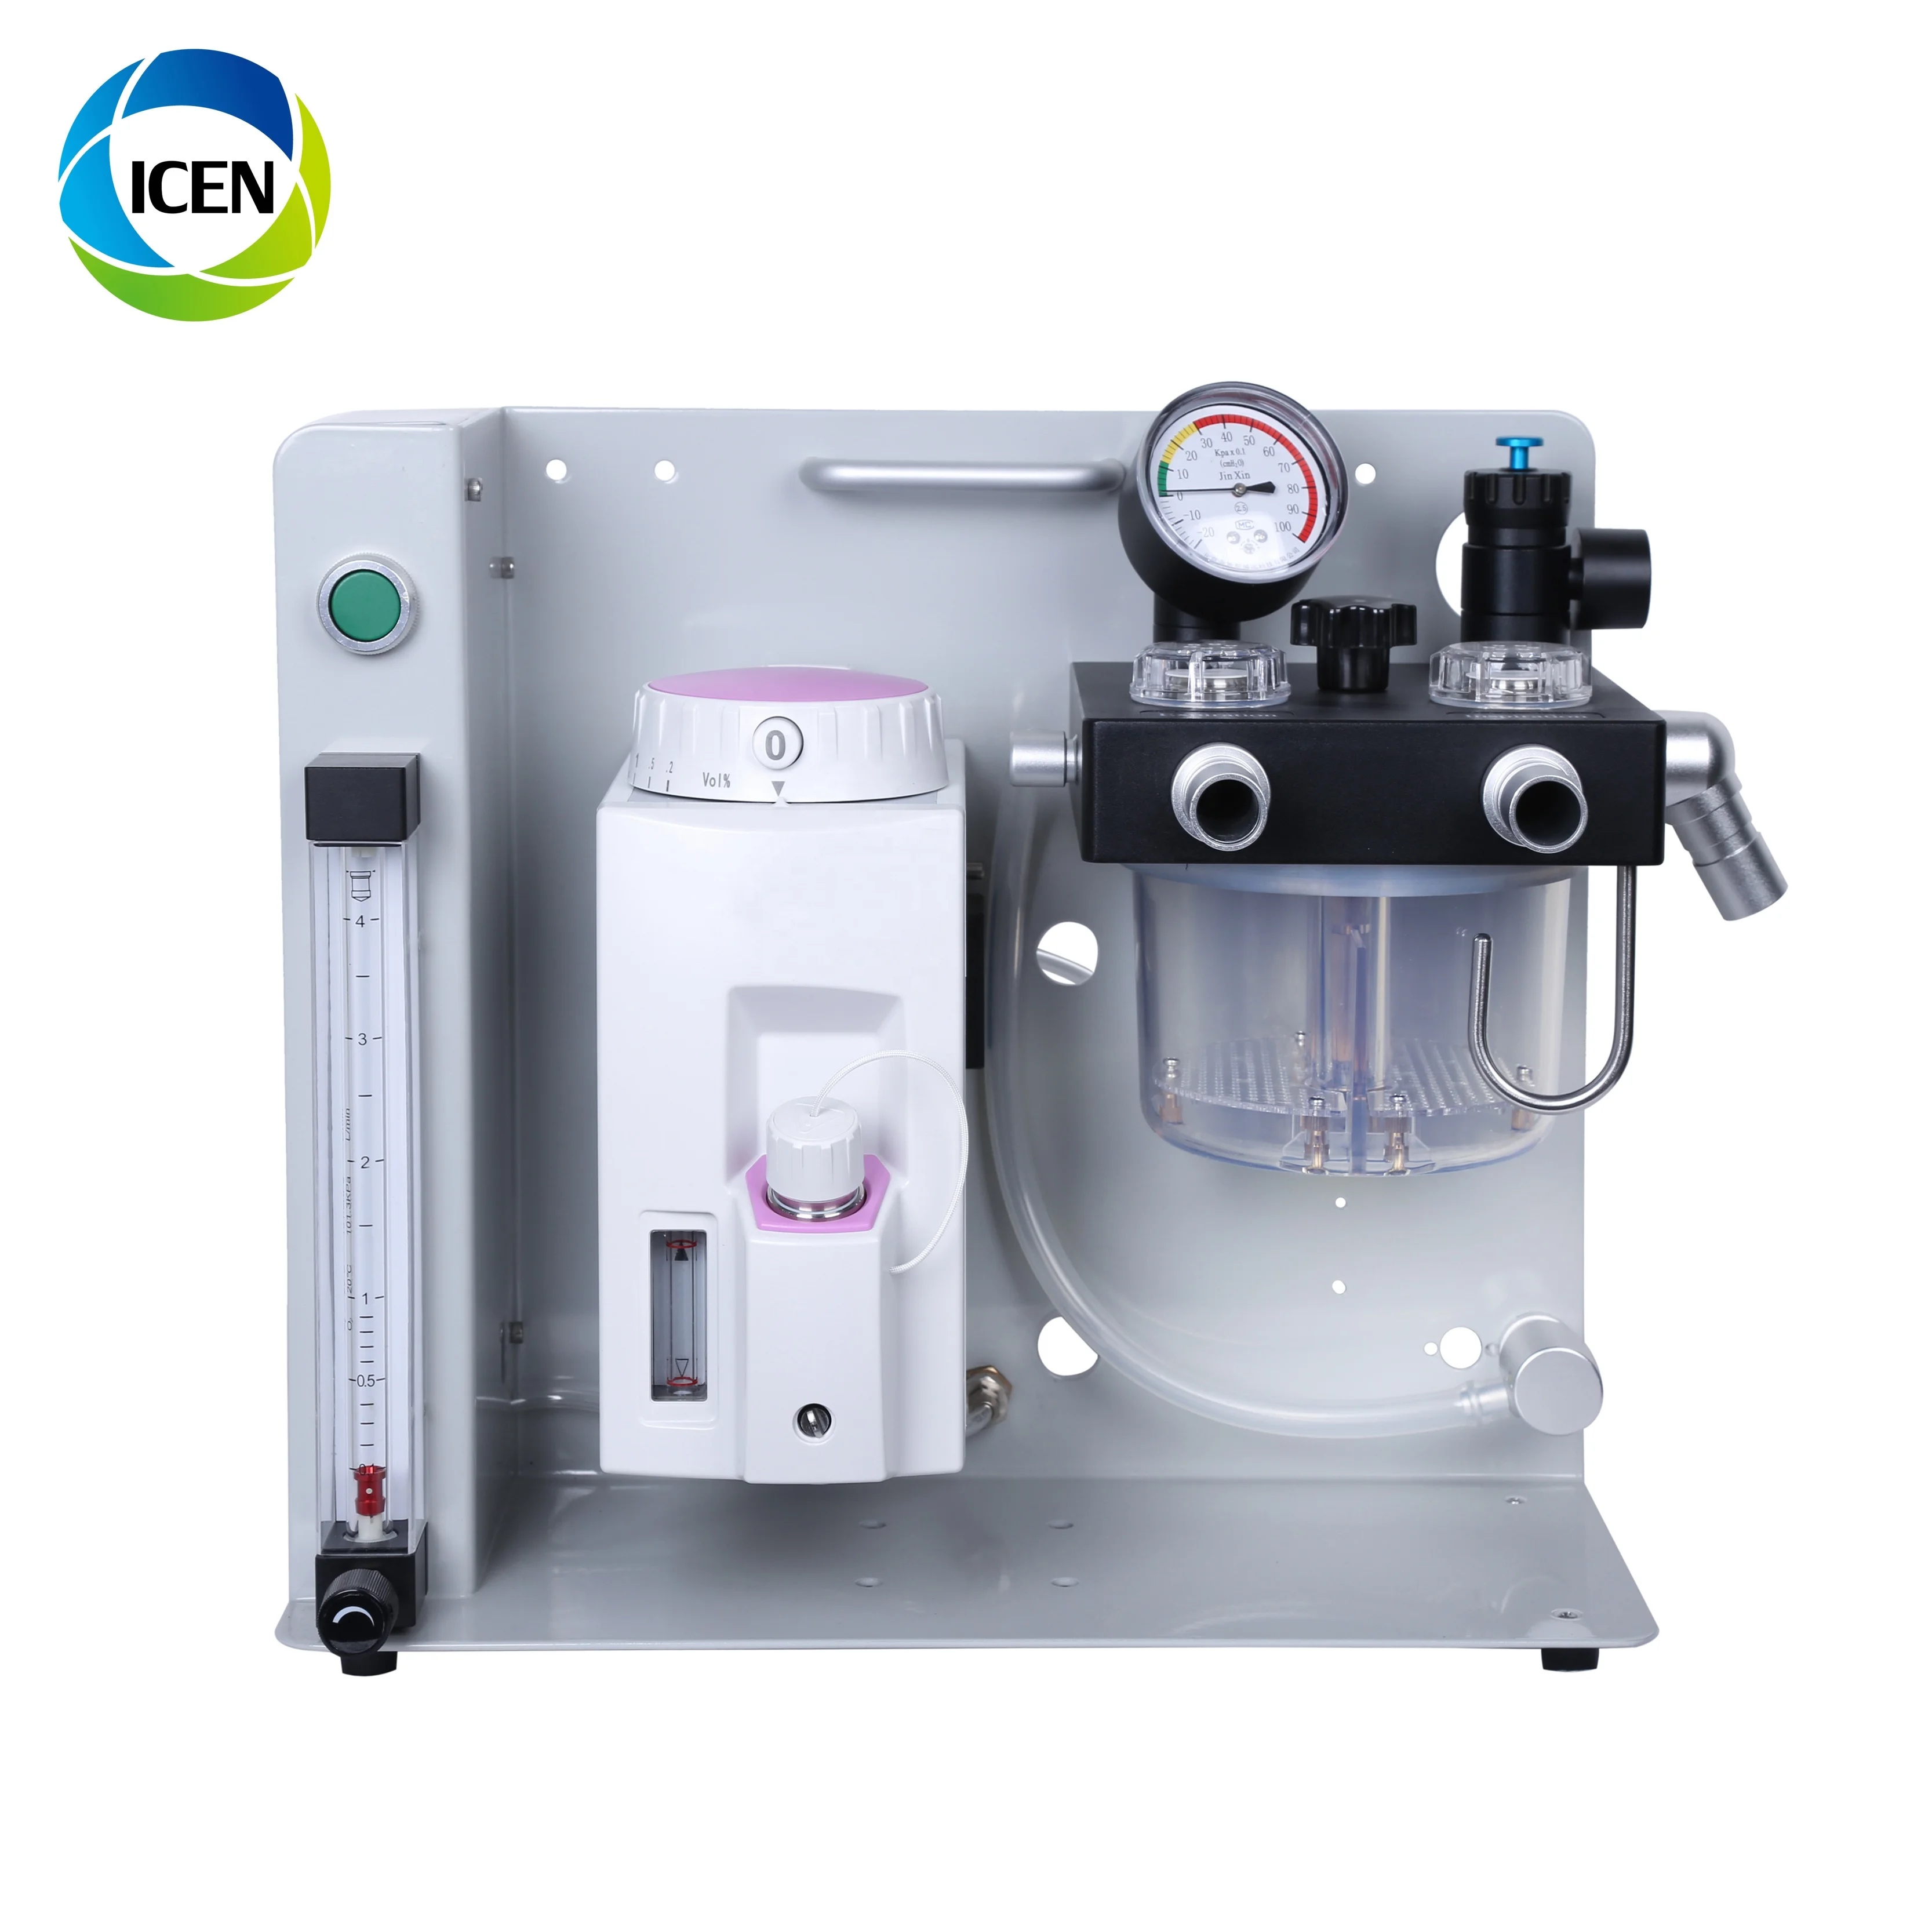 IN-E7600B High quality New Small Cheap Price Veterinary Anesthesia Animal Vet Anesthesia Machine